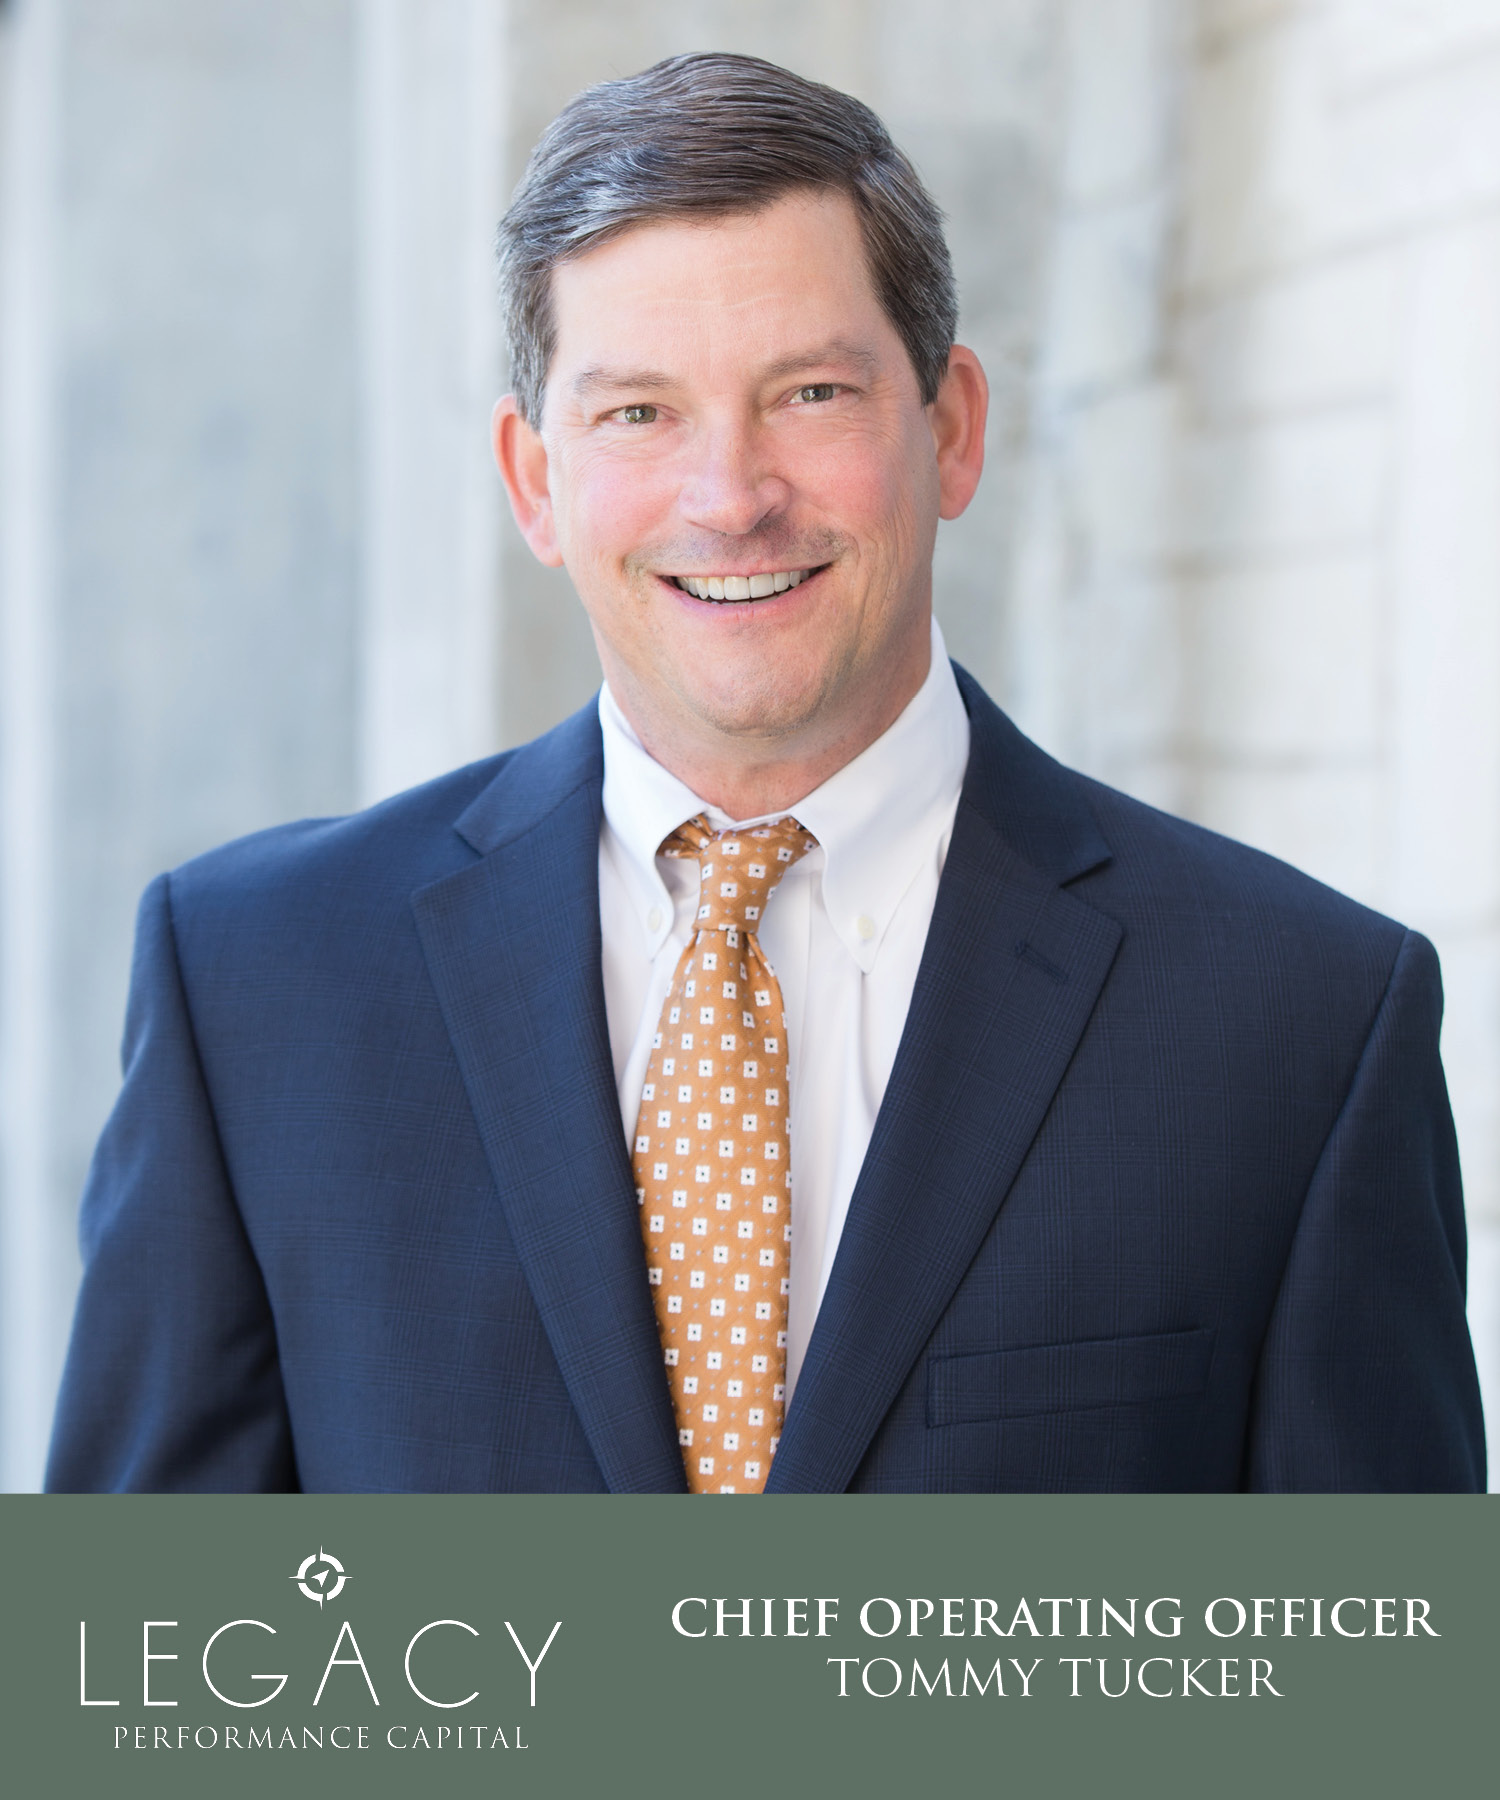 Legacy Performance Capital Names First-Ever COO to Spearhead Growth of Residential and Mixed Use Properties with initial focus in Central Texas